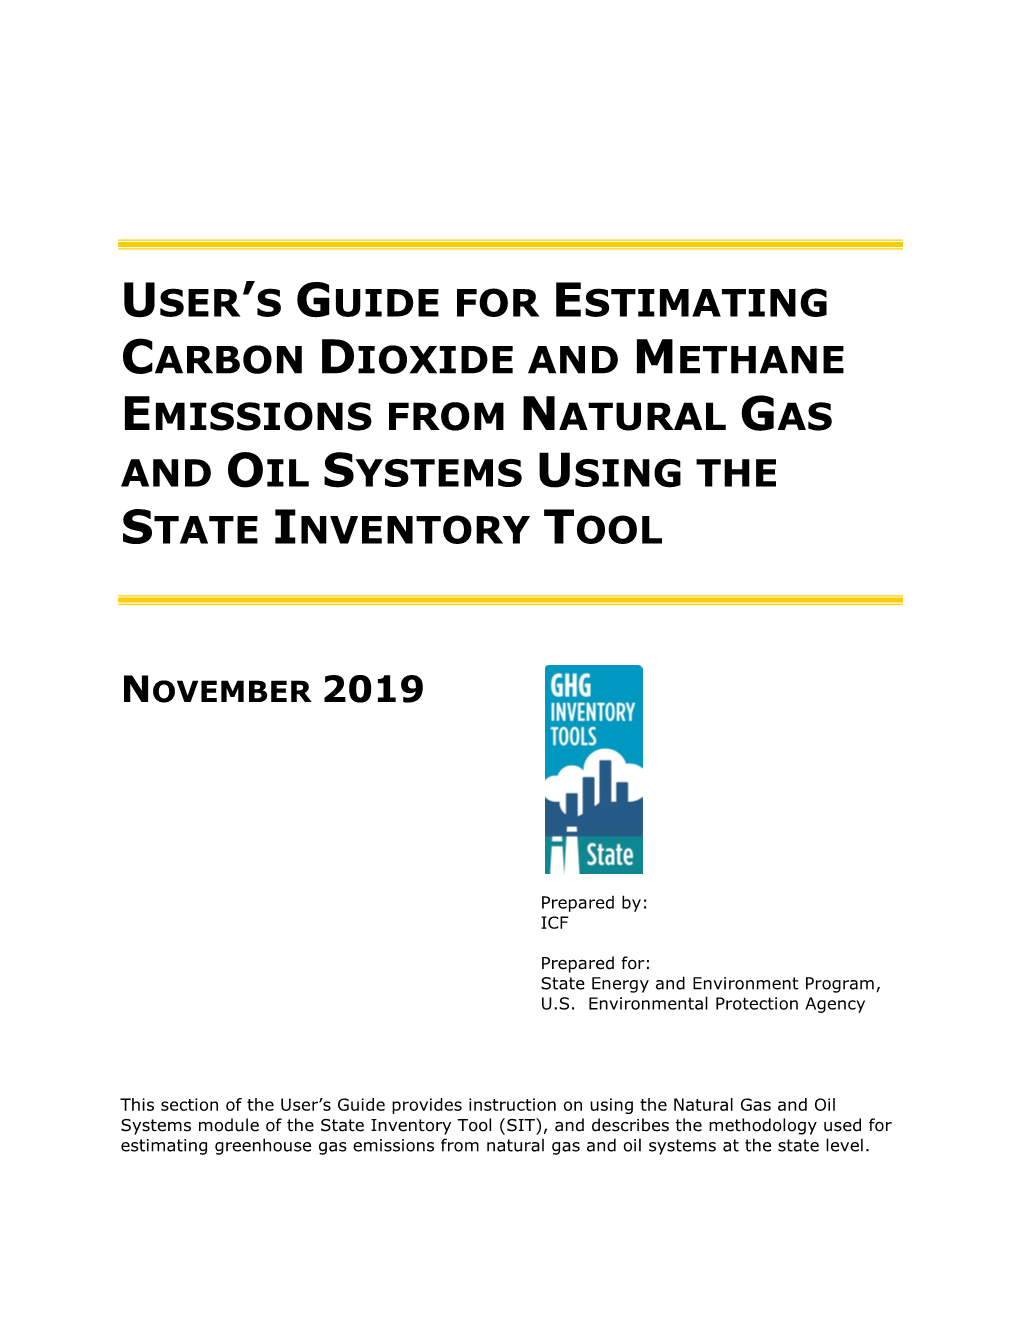 User's Guide for Estimating Carbon Dioxide and Methane Emissions from Natural Gas and Oil Systems Using the State Inventory To